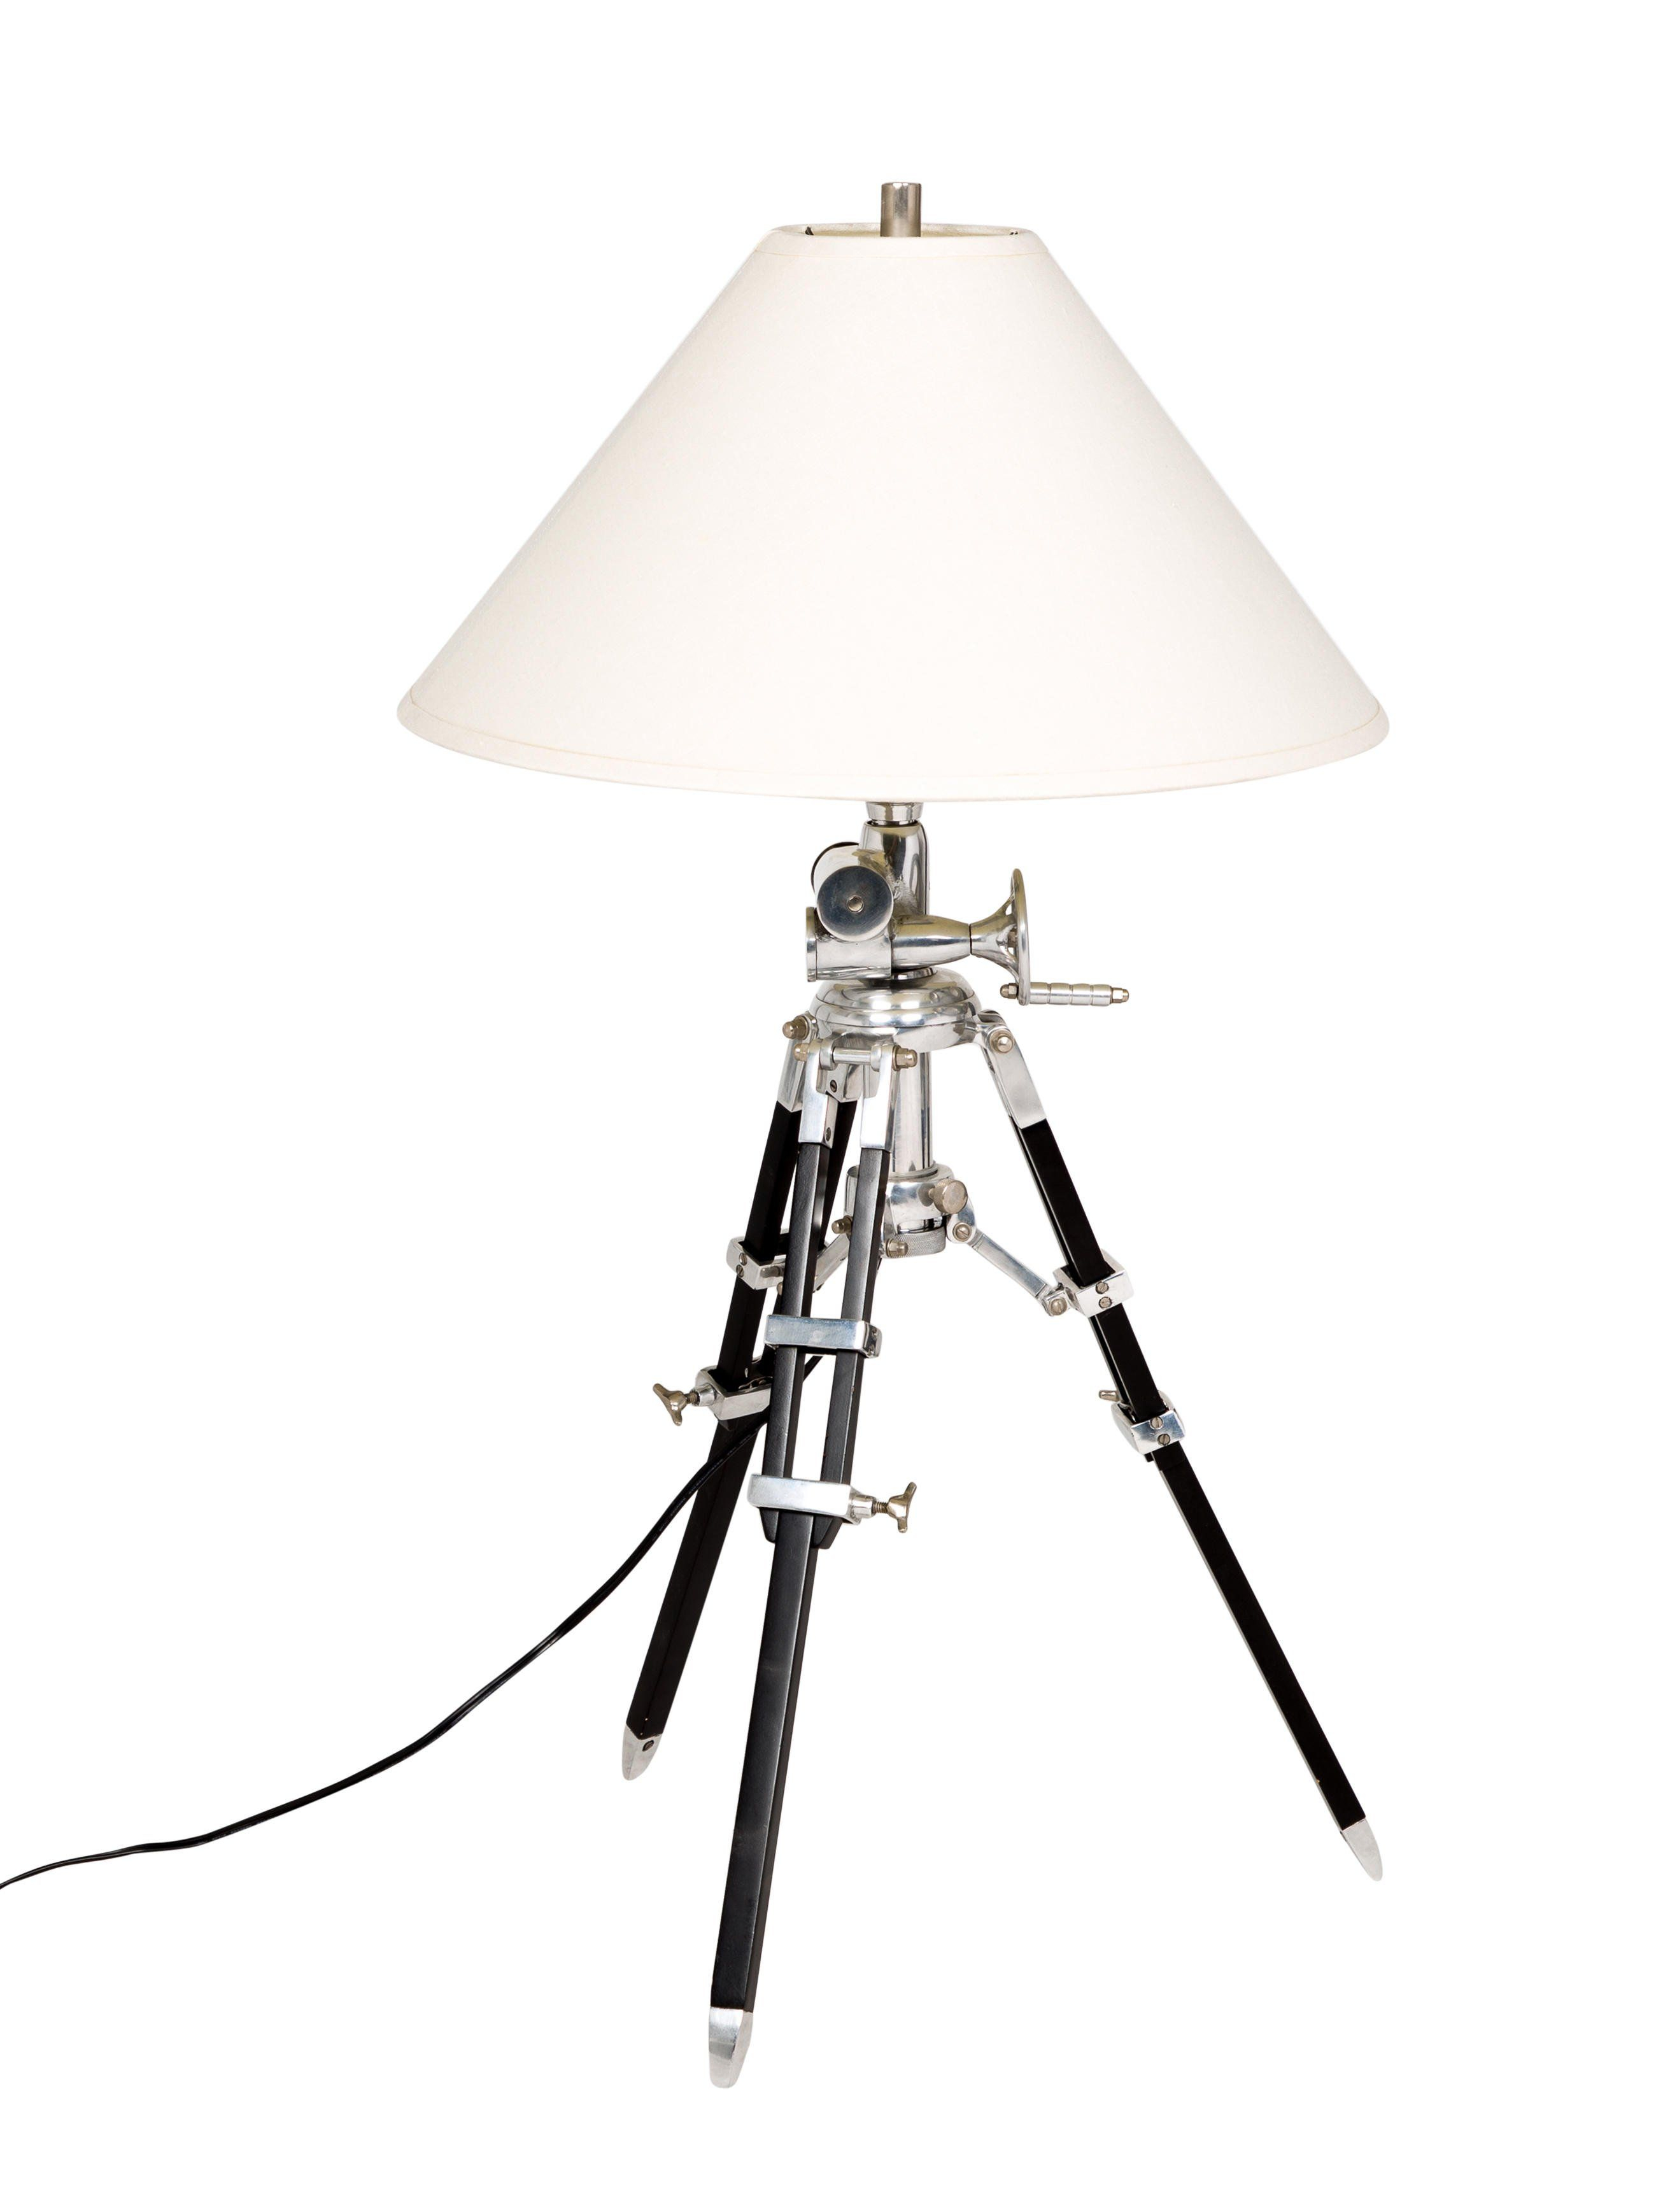 Royal Marine Tripod Table Lamp Cute Cosplay In 2019 intended for dimensions 2634 X 3474